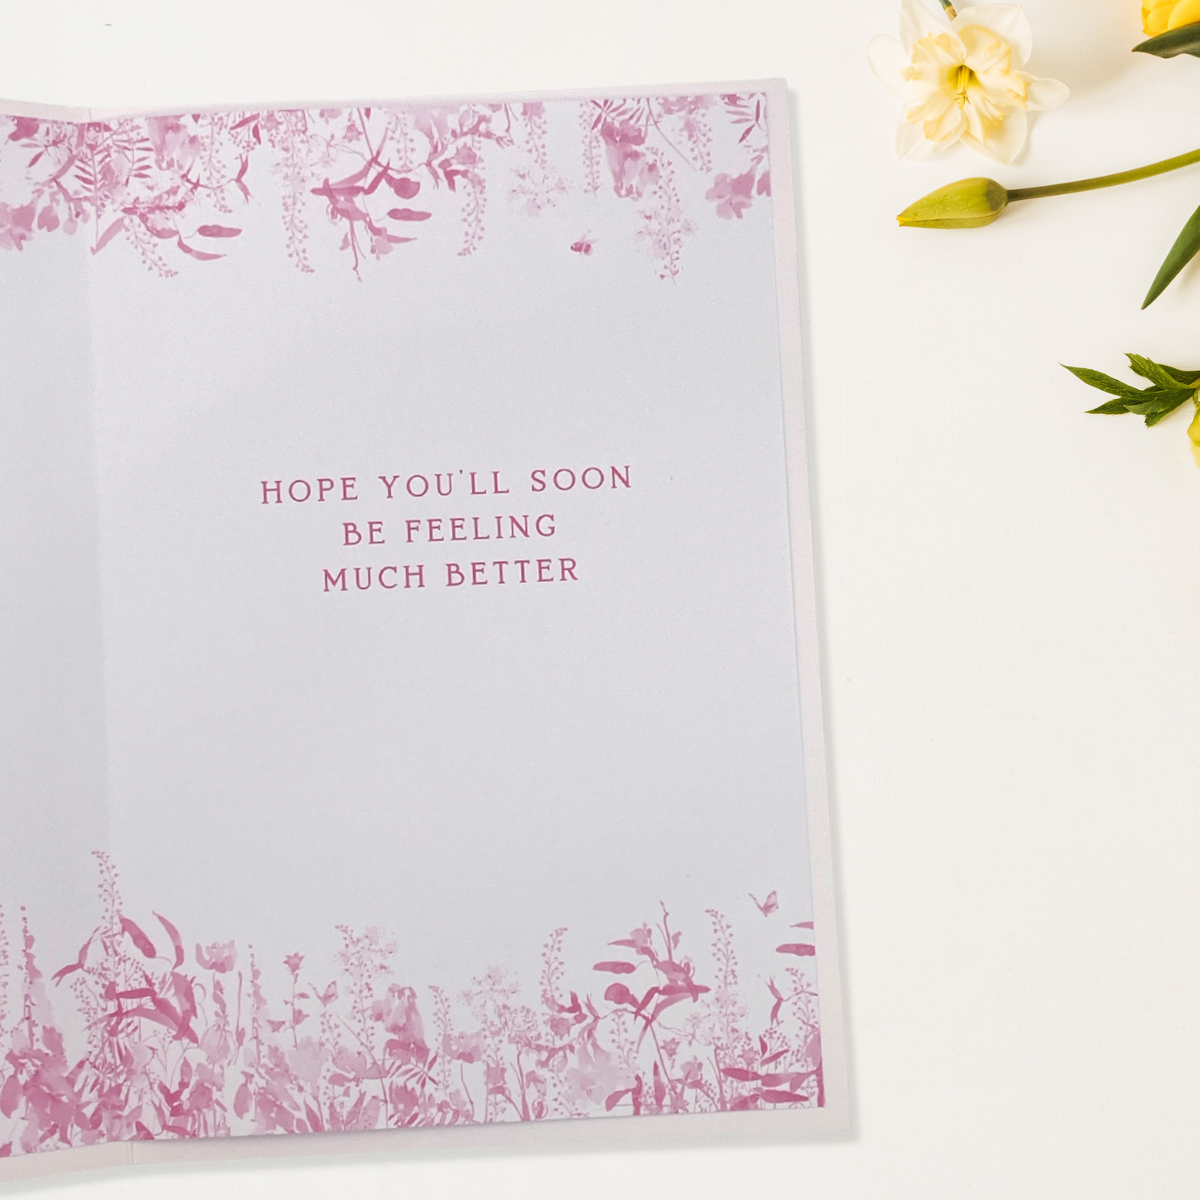 inside image with pink flowers and text